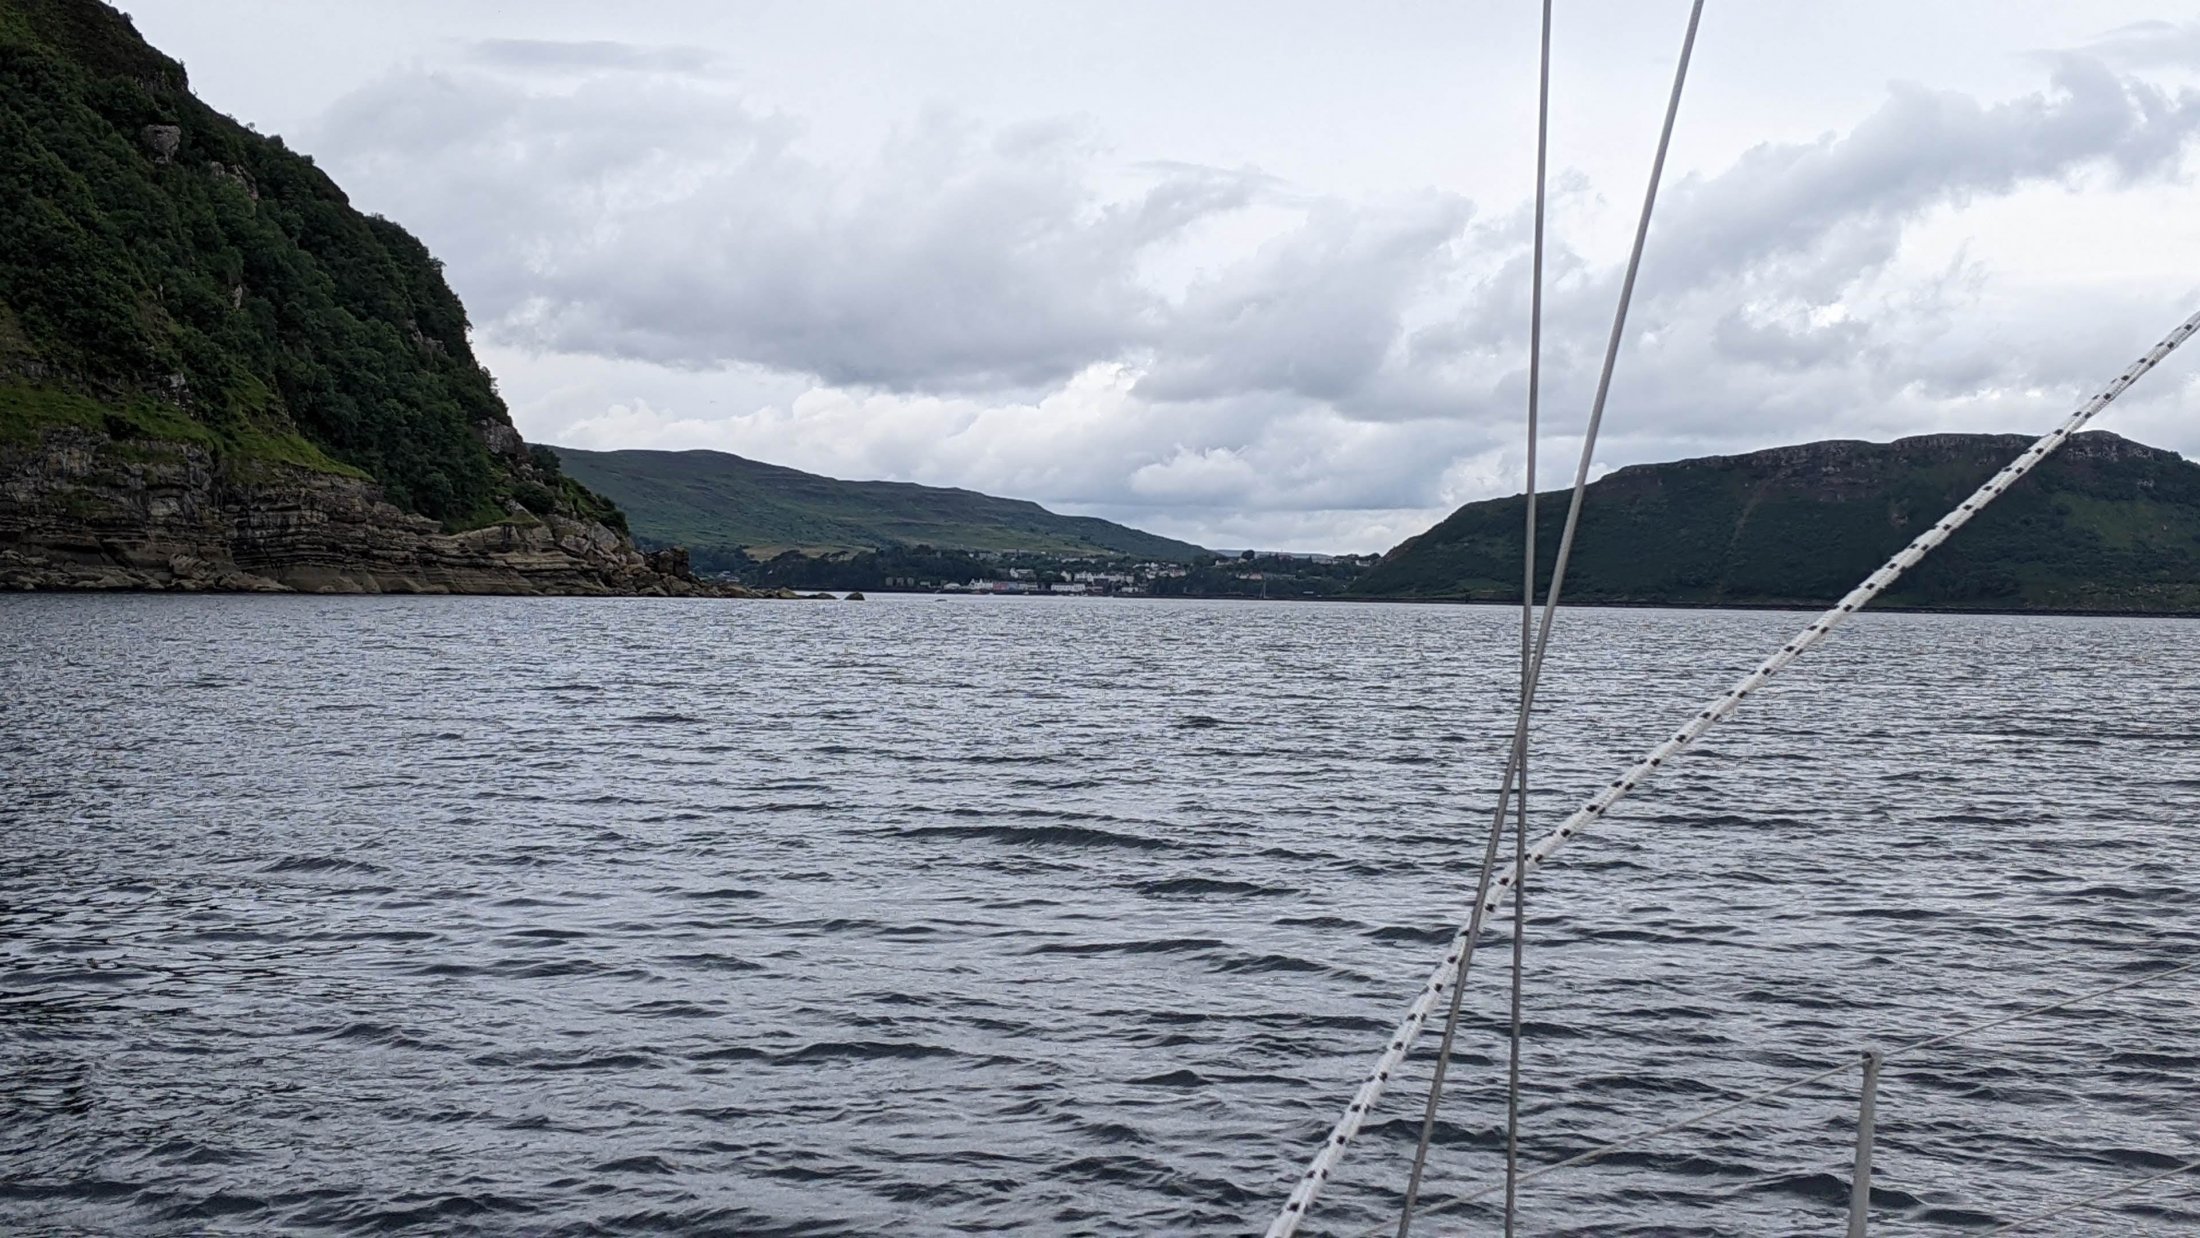 Approaching Portree